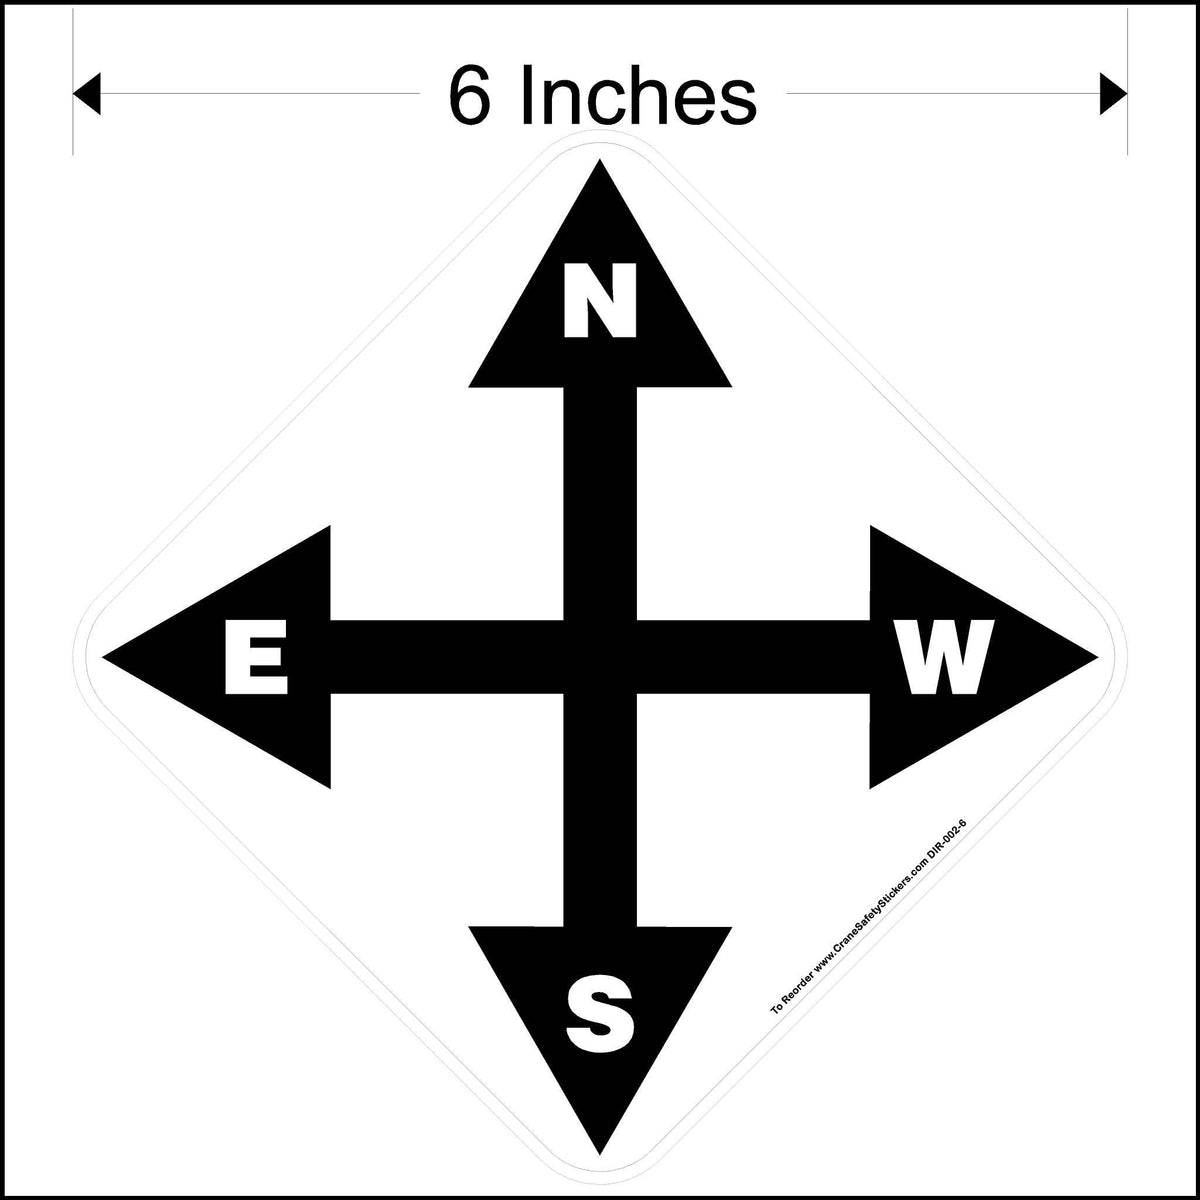 6 Inch North South West East Overhead Crane Directional Decal.